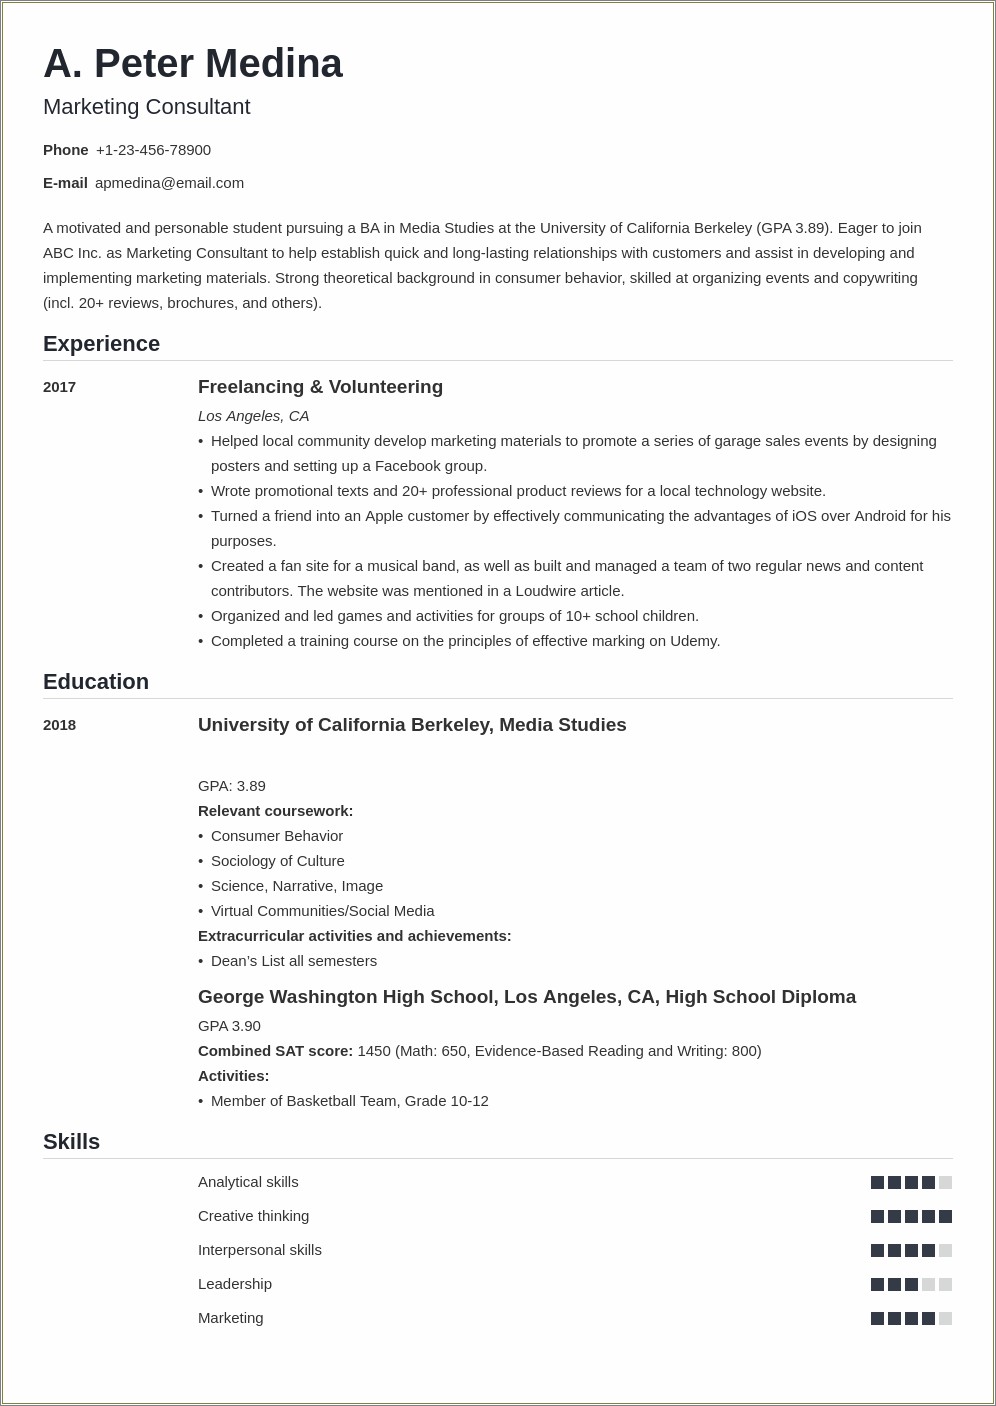 Resume Summary Examples With No Work Experience